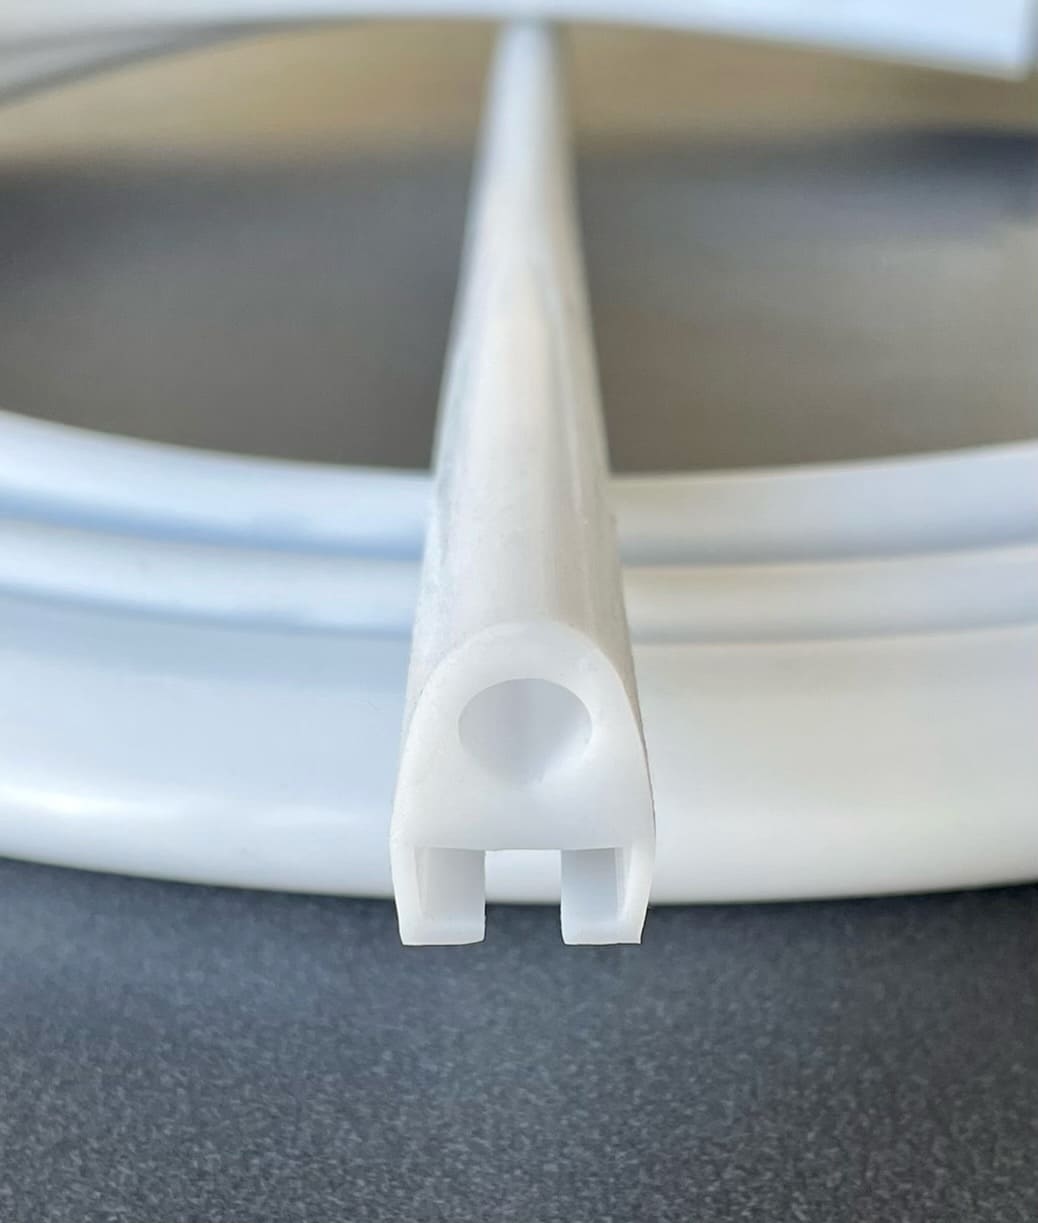 White extruded silicone rubber profile shaped like a ghost